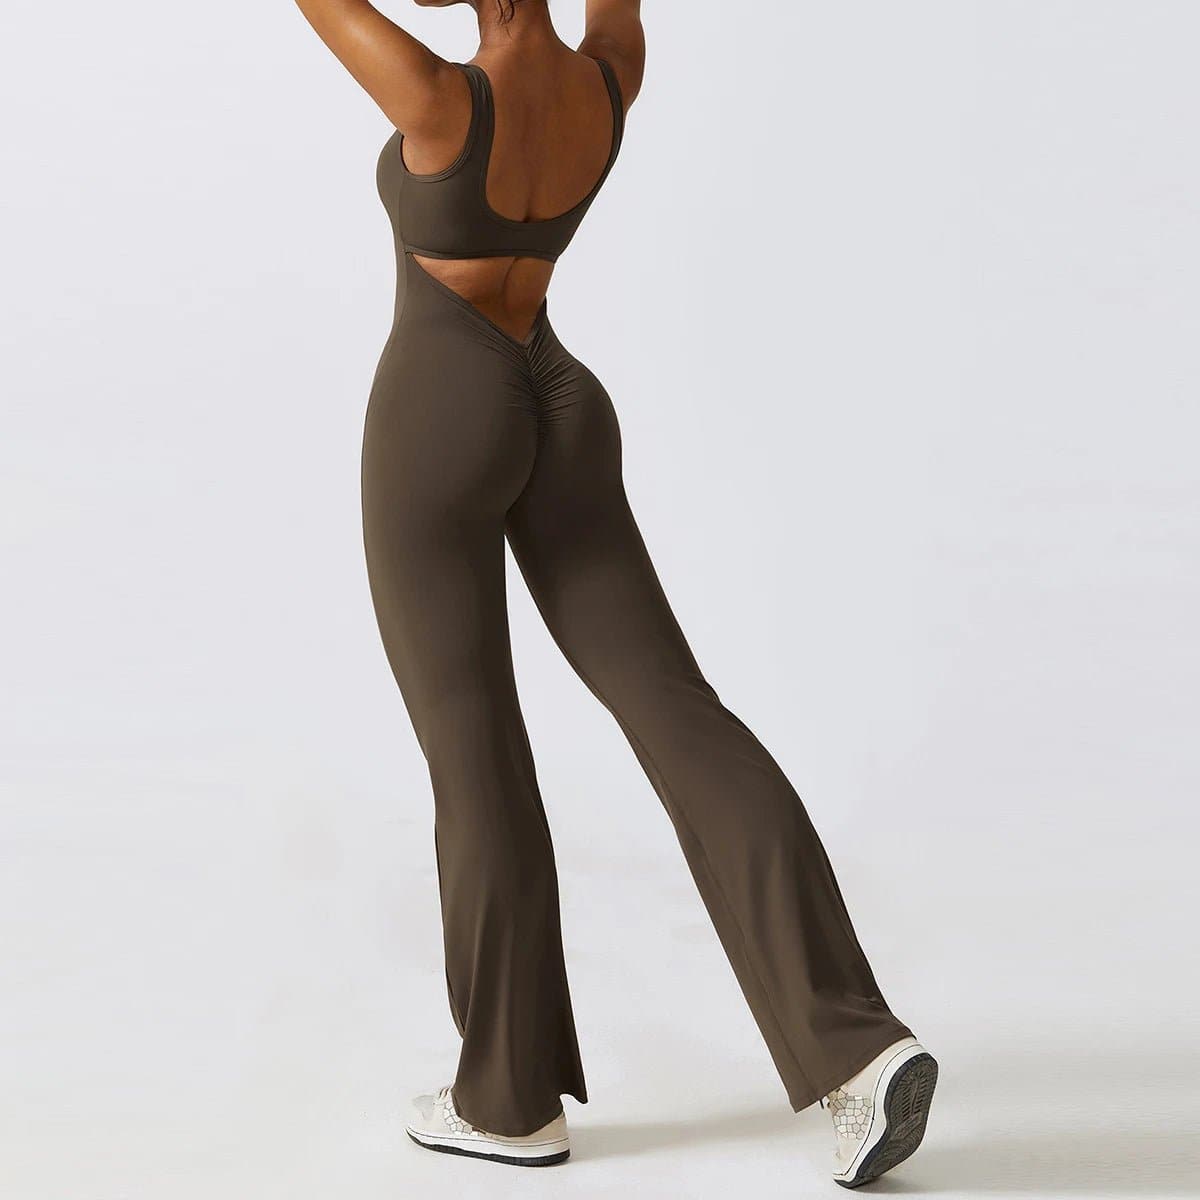 Naked Feeling Yoga Jumpsuit for Women - Anti-Shrink, Breathable, Quick Dry - Wandering Woman